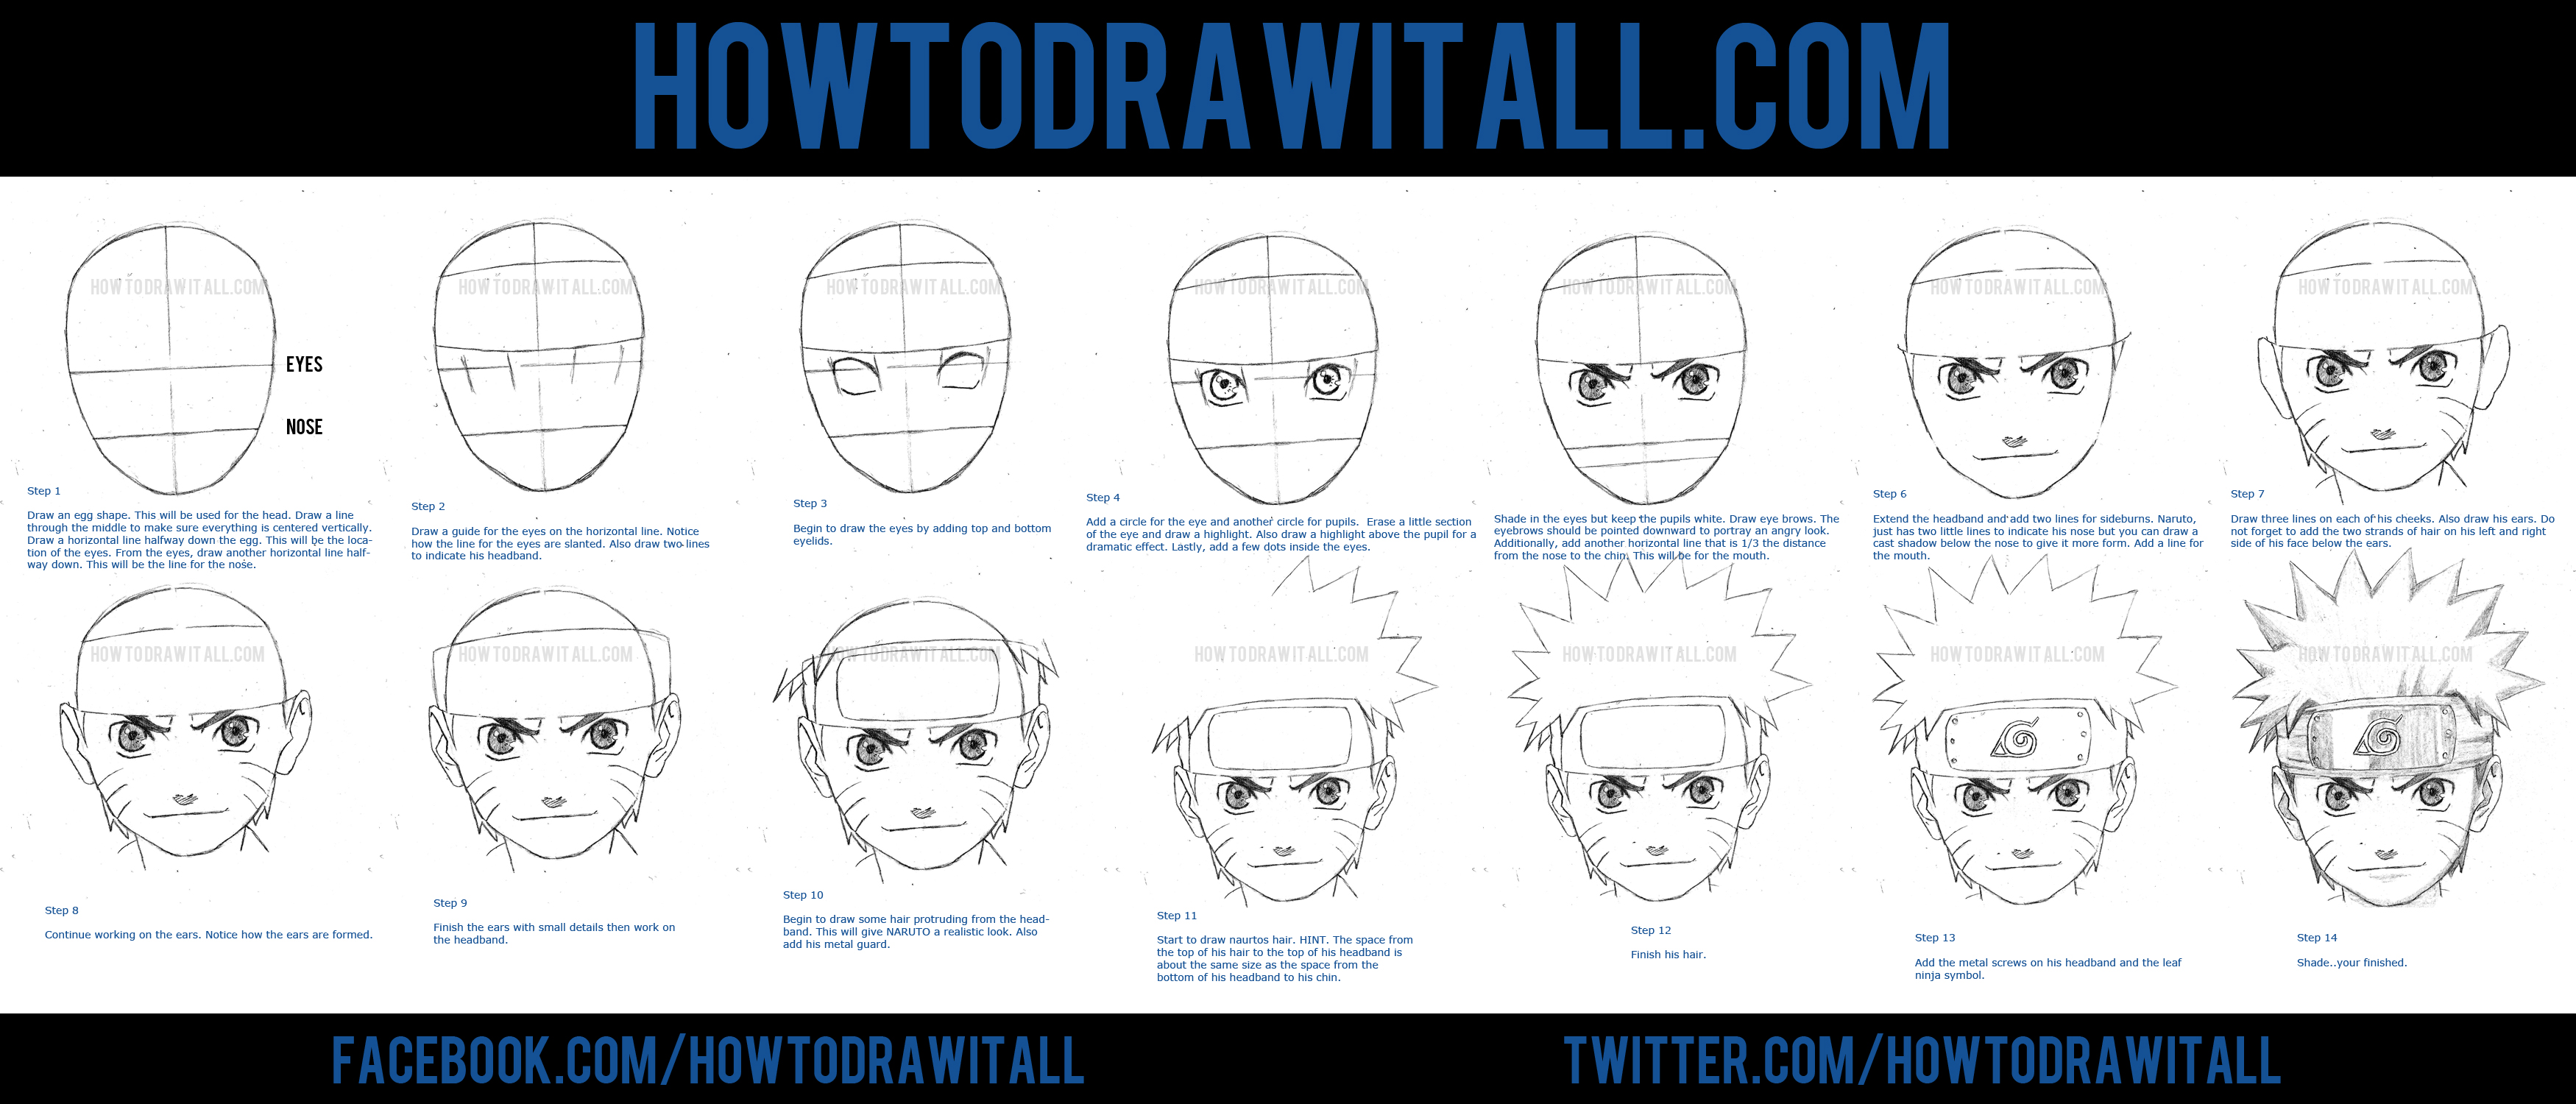 HOW TO DRAW NARUTO UZUMAKI FACE - Step by Step Drawing